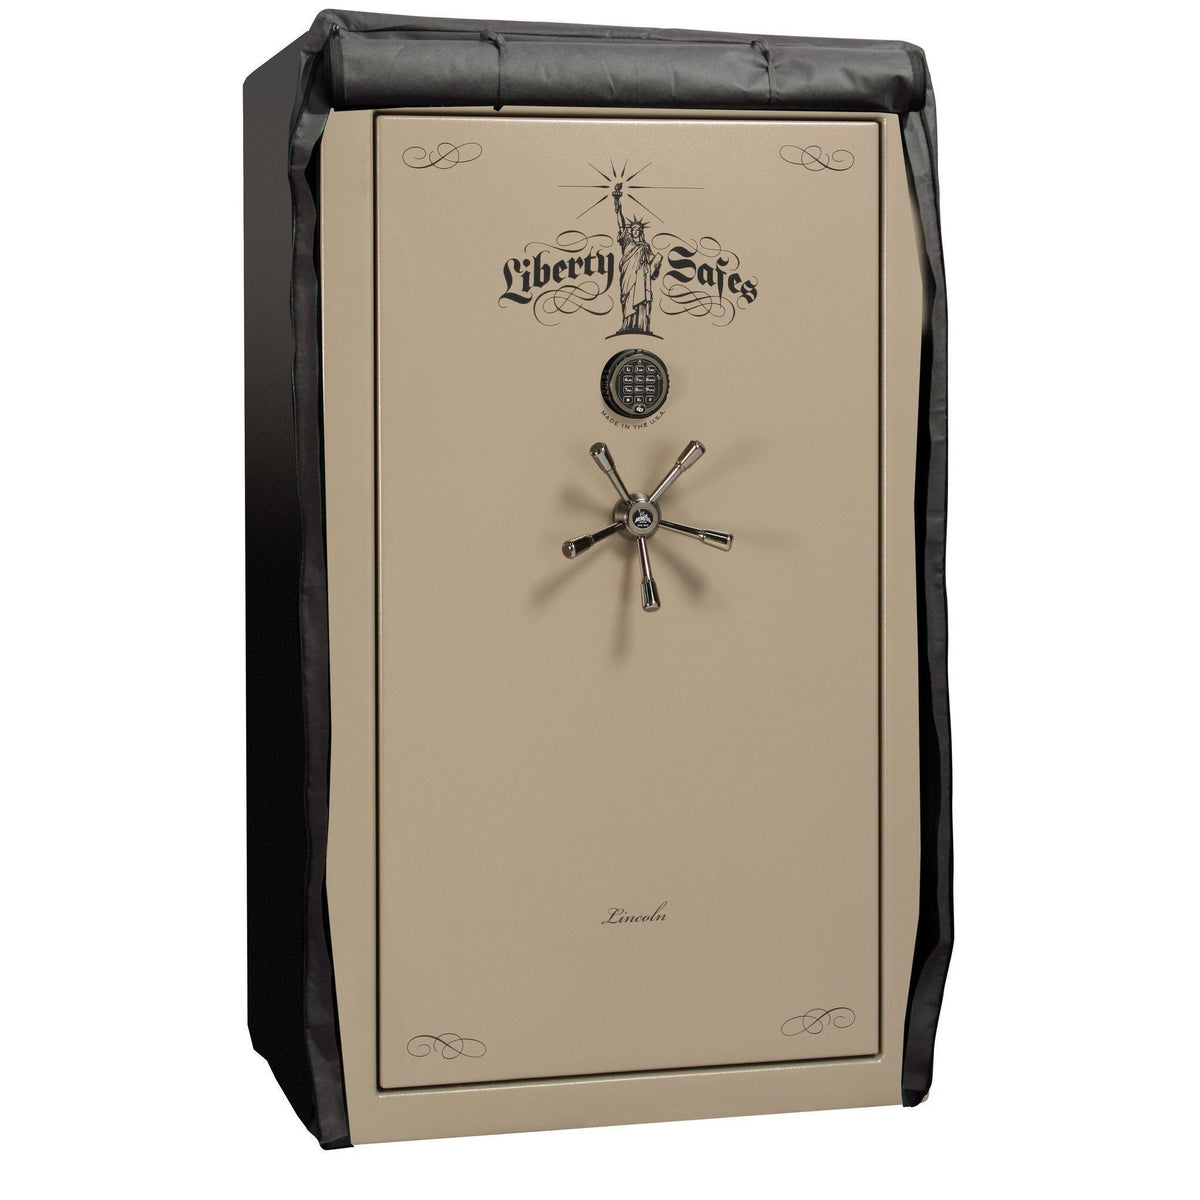 Accessory - Security - Safe Cover - 30-35 size safes | Liberty Safe Norcal.